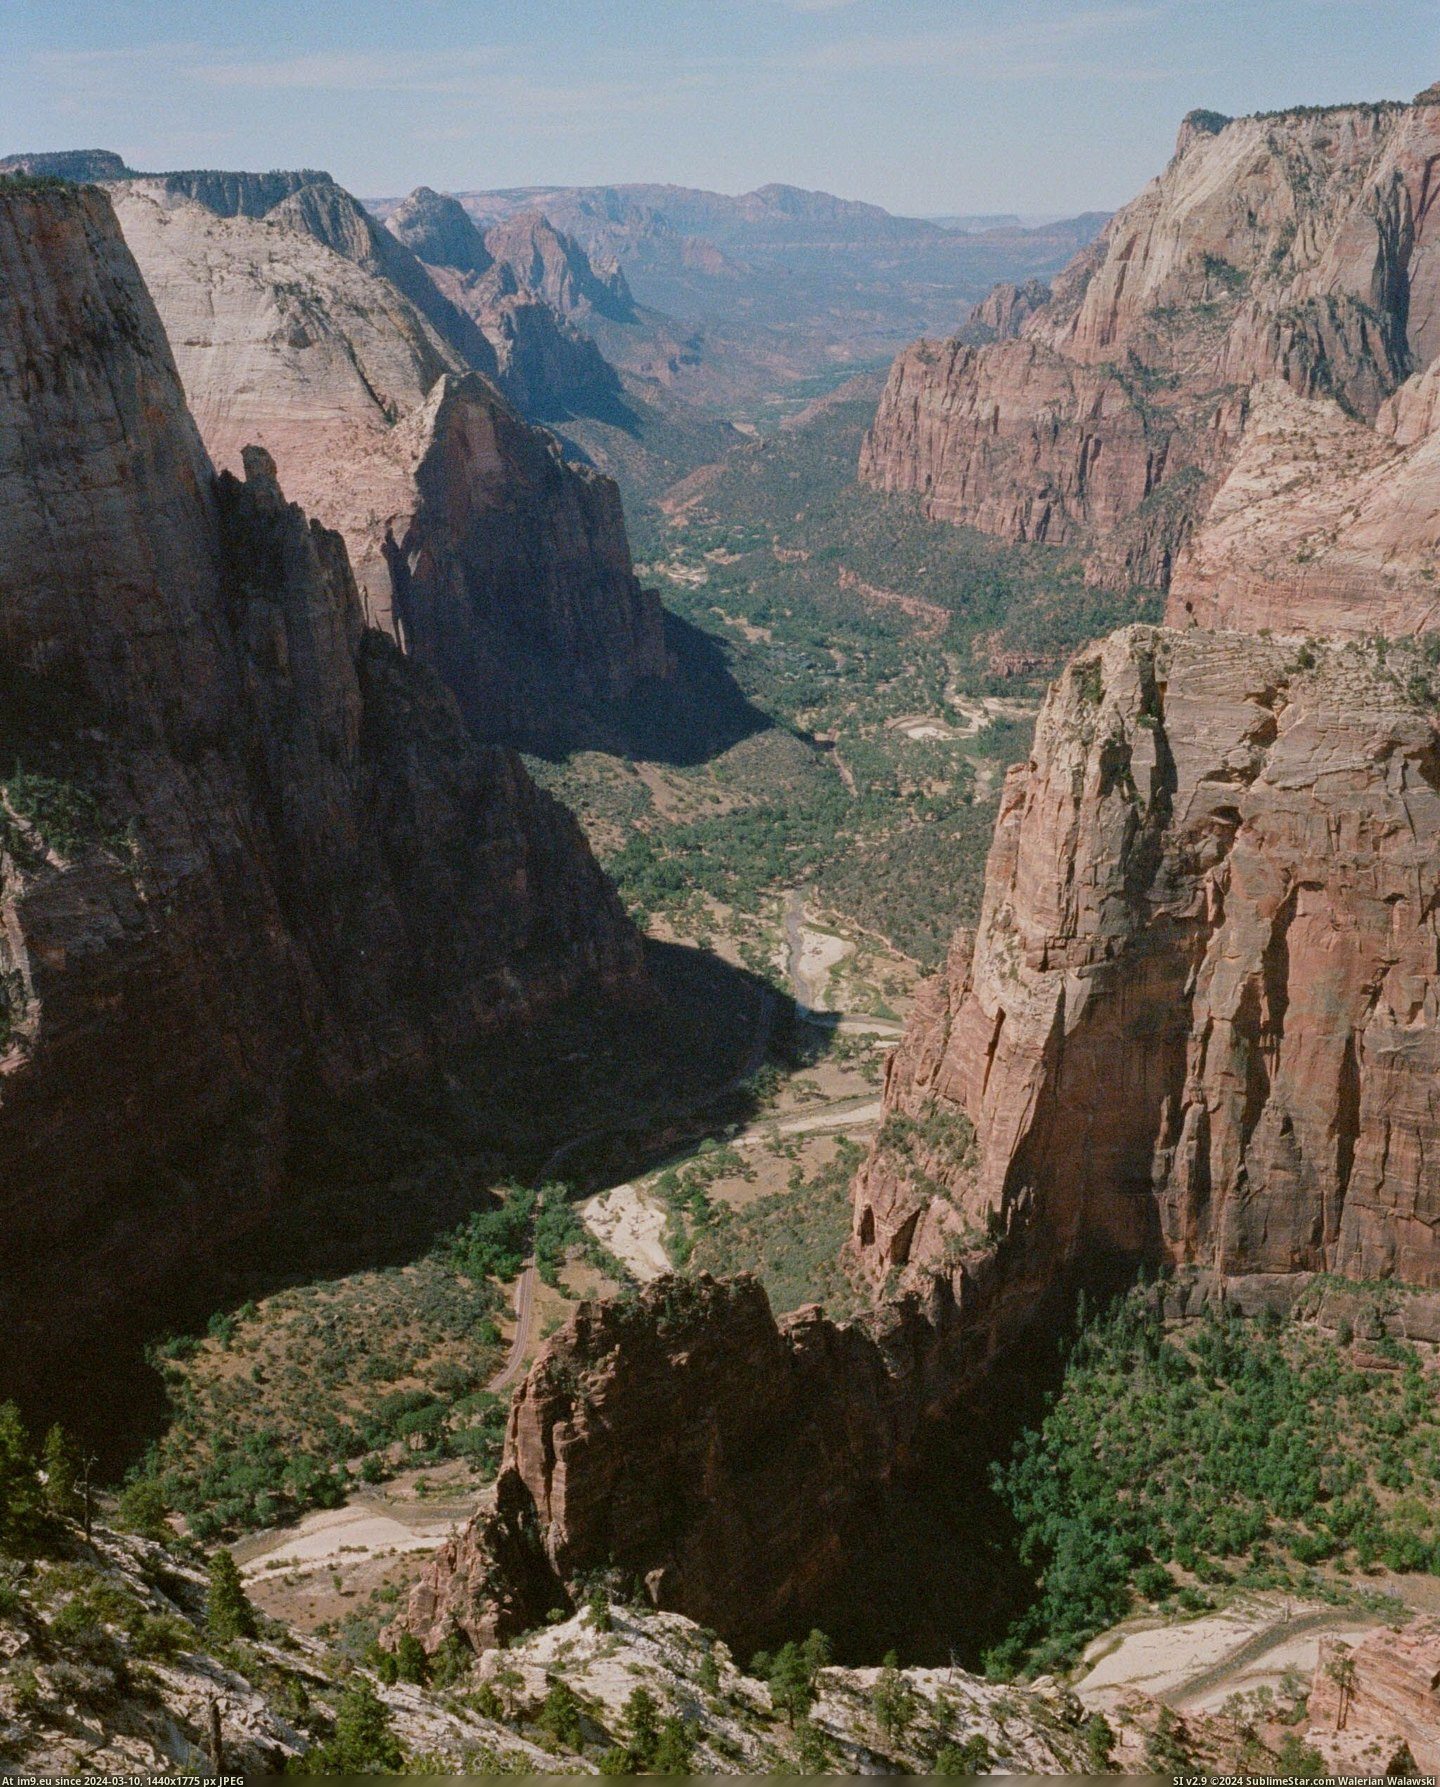 #Park #National #Point #Zion #Opinion #Overlooking #Observation #Utah #Angels #Landing [Earthporn] The best view in Zion in my opinion. From Observation Point, overlooking Angels Landing. Zion National Park, Utah. [ Pic. (Изображение из альбом My r/EARTHPORN favs))